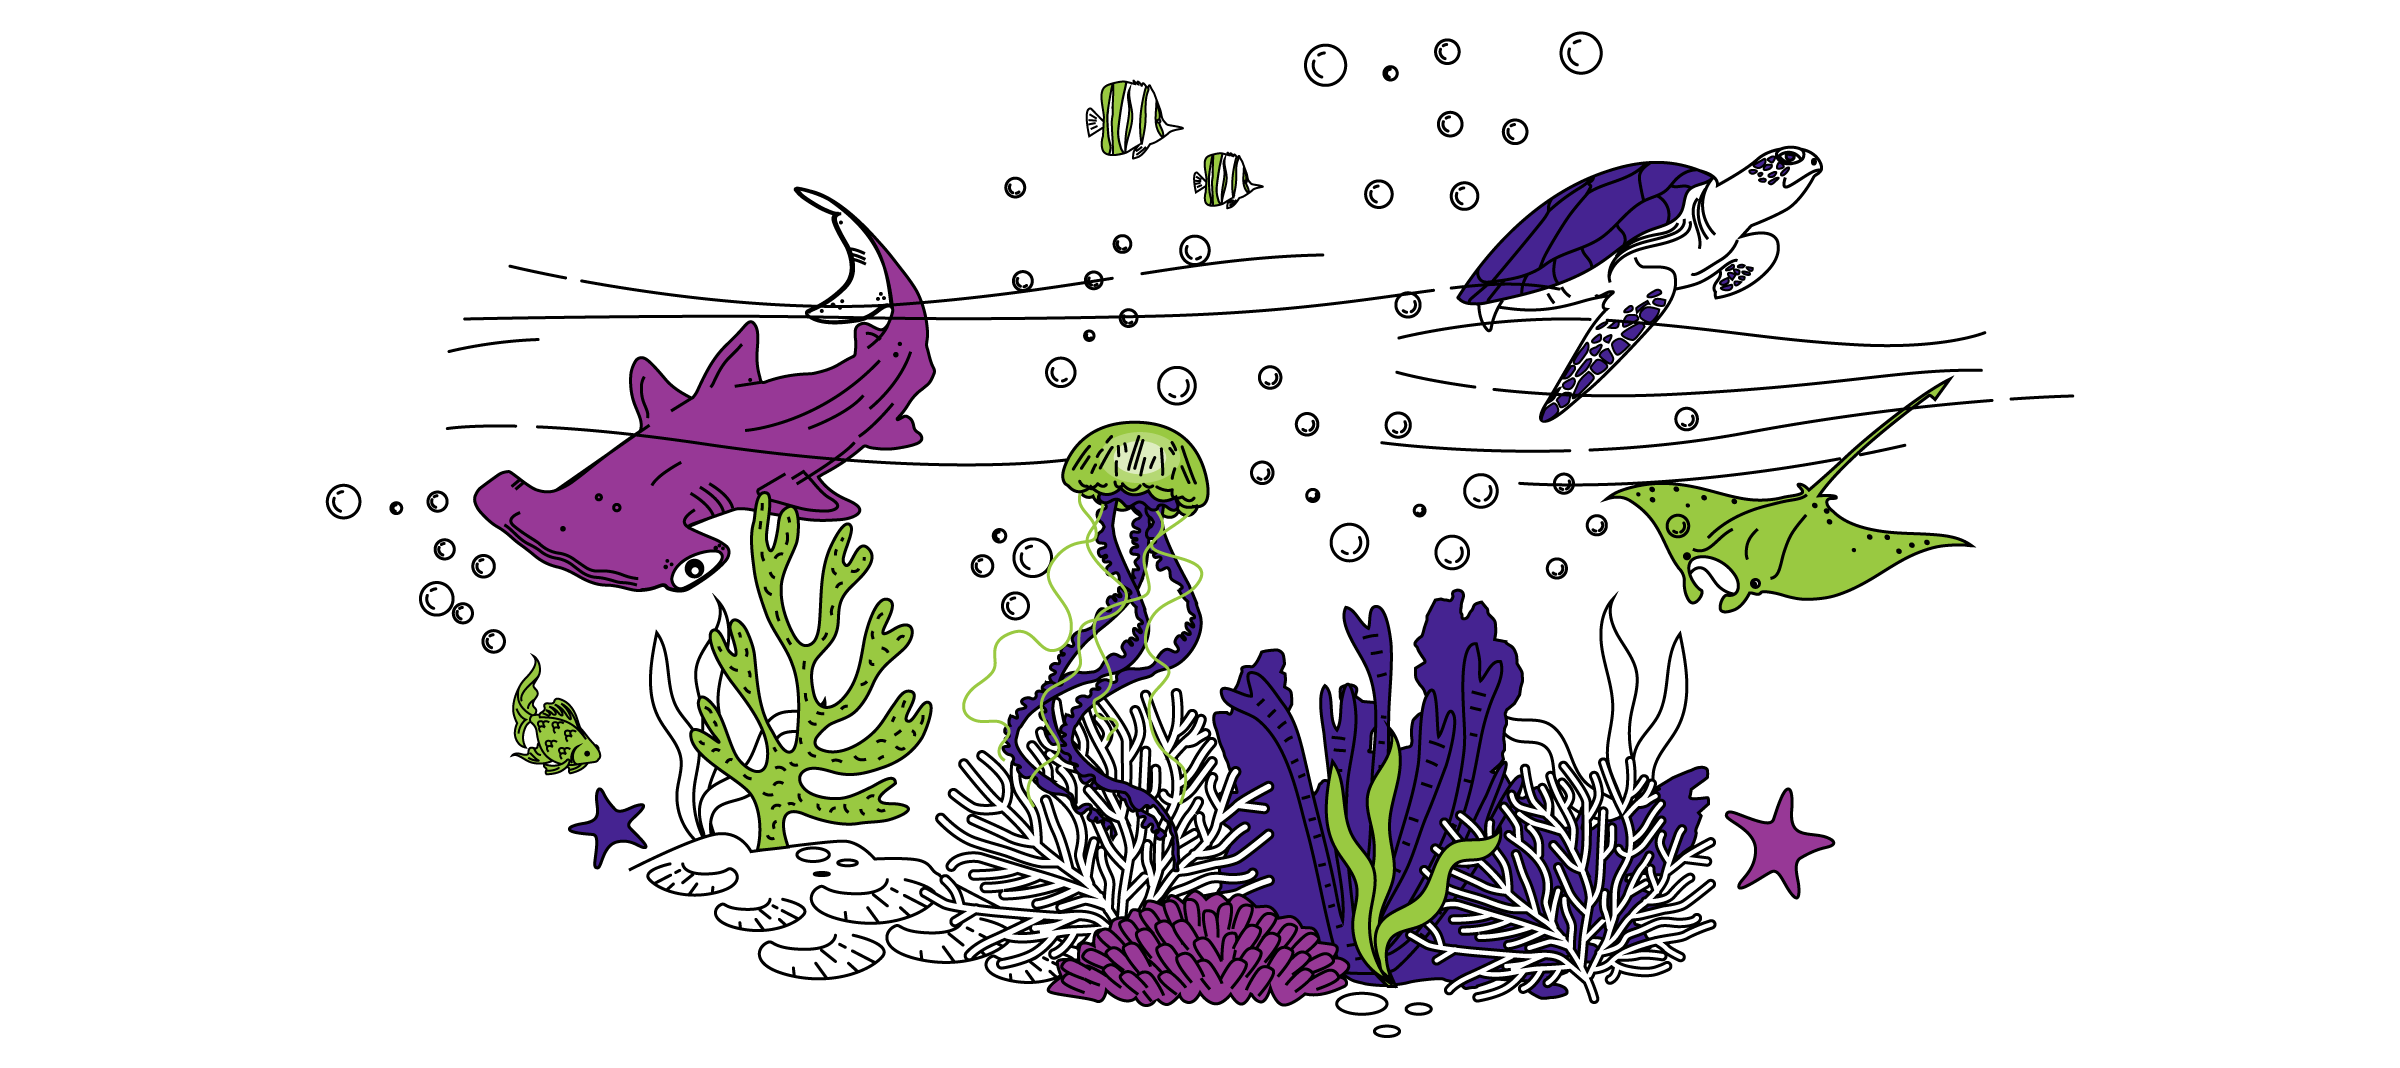 A coral reef ecosystem with corals, hammerhead shark, jelly fish, and turtle.